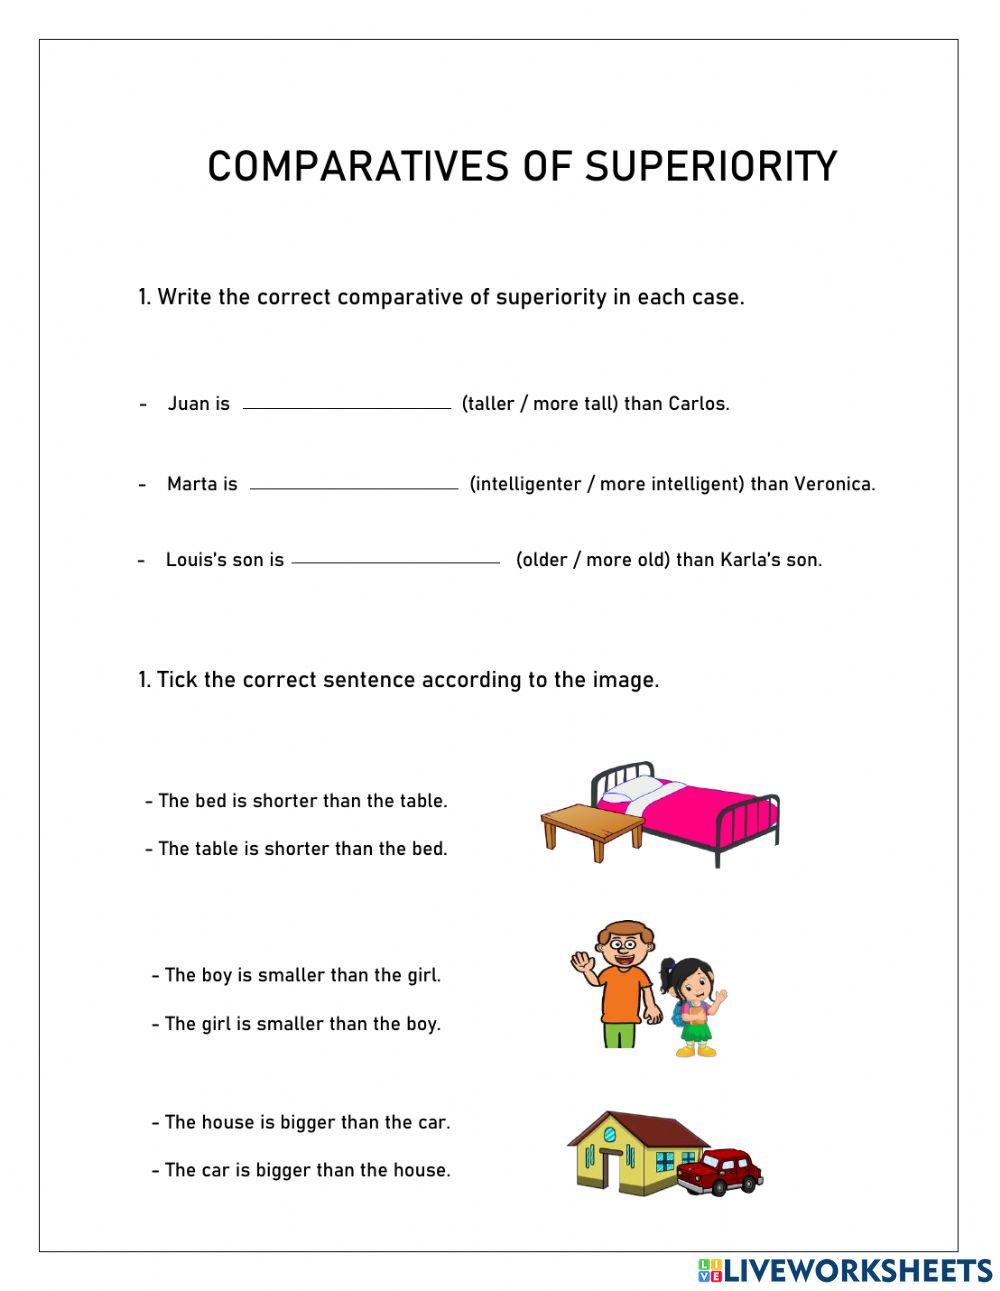 Comparatives of superiority